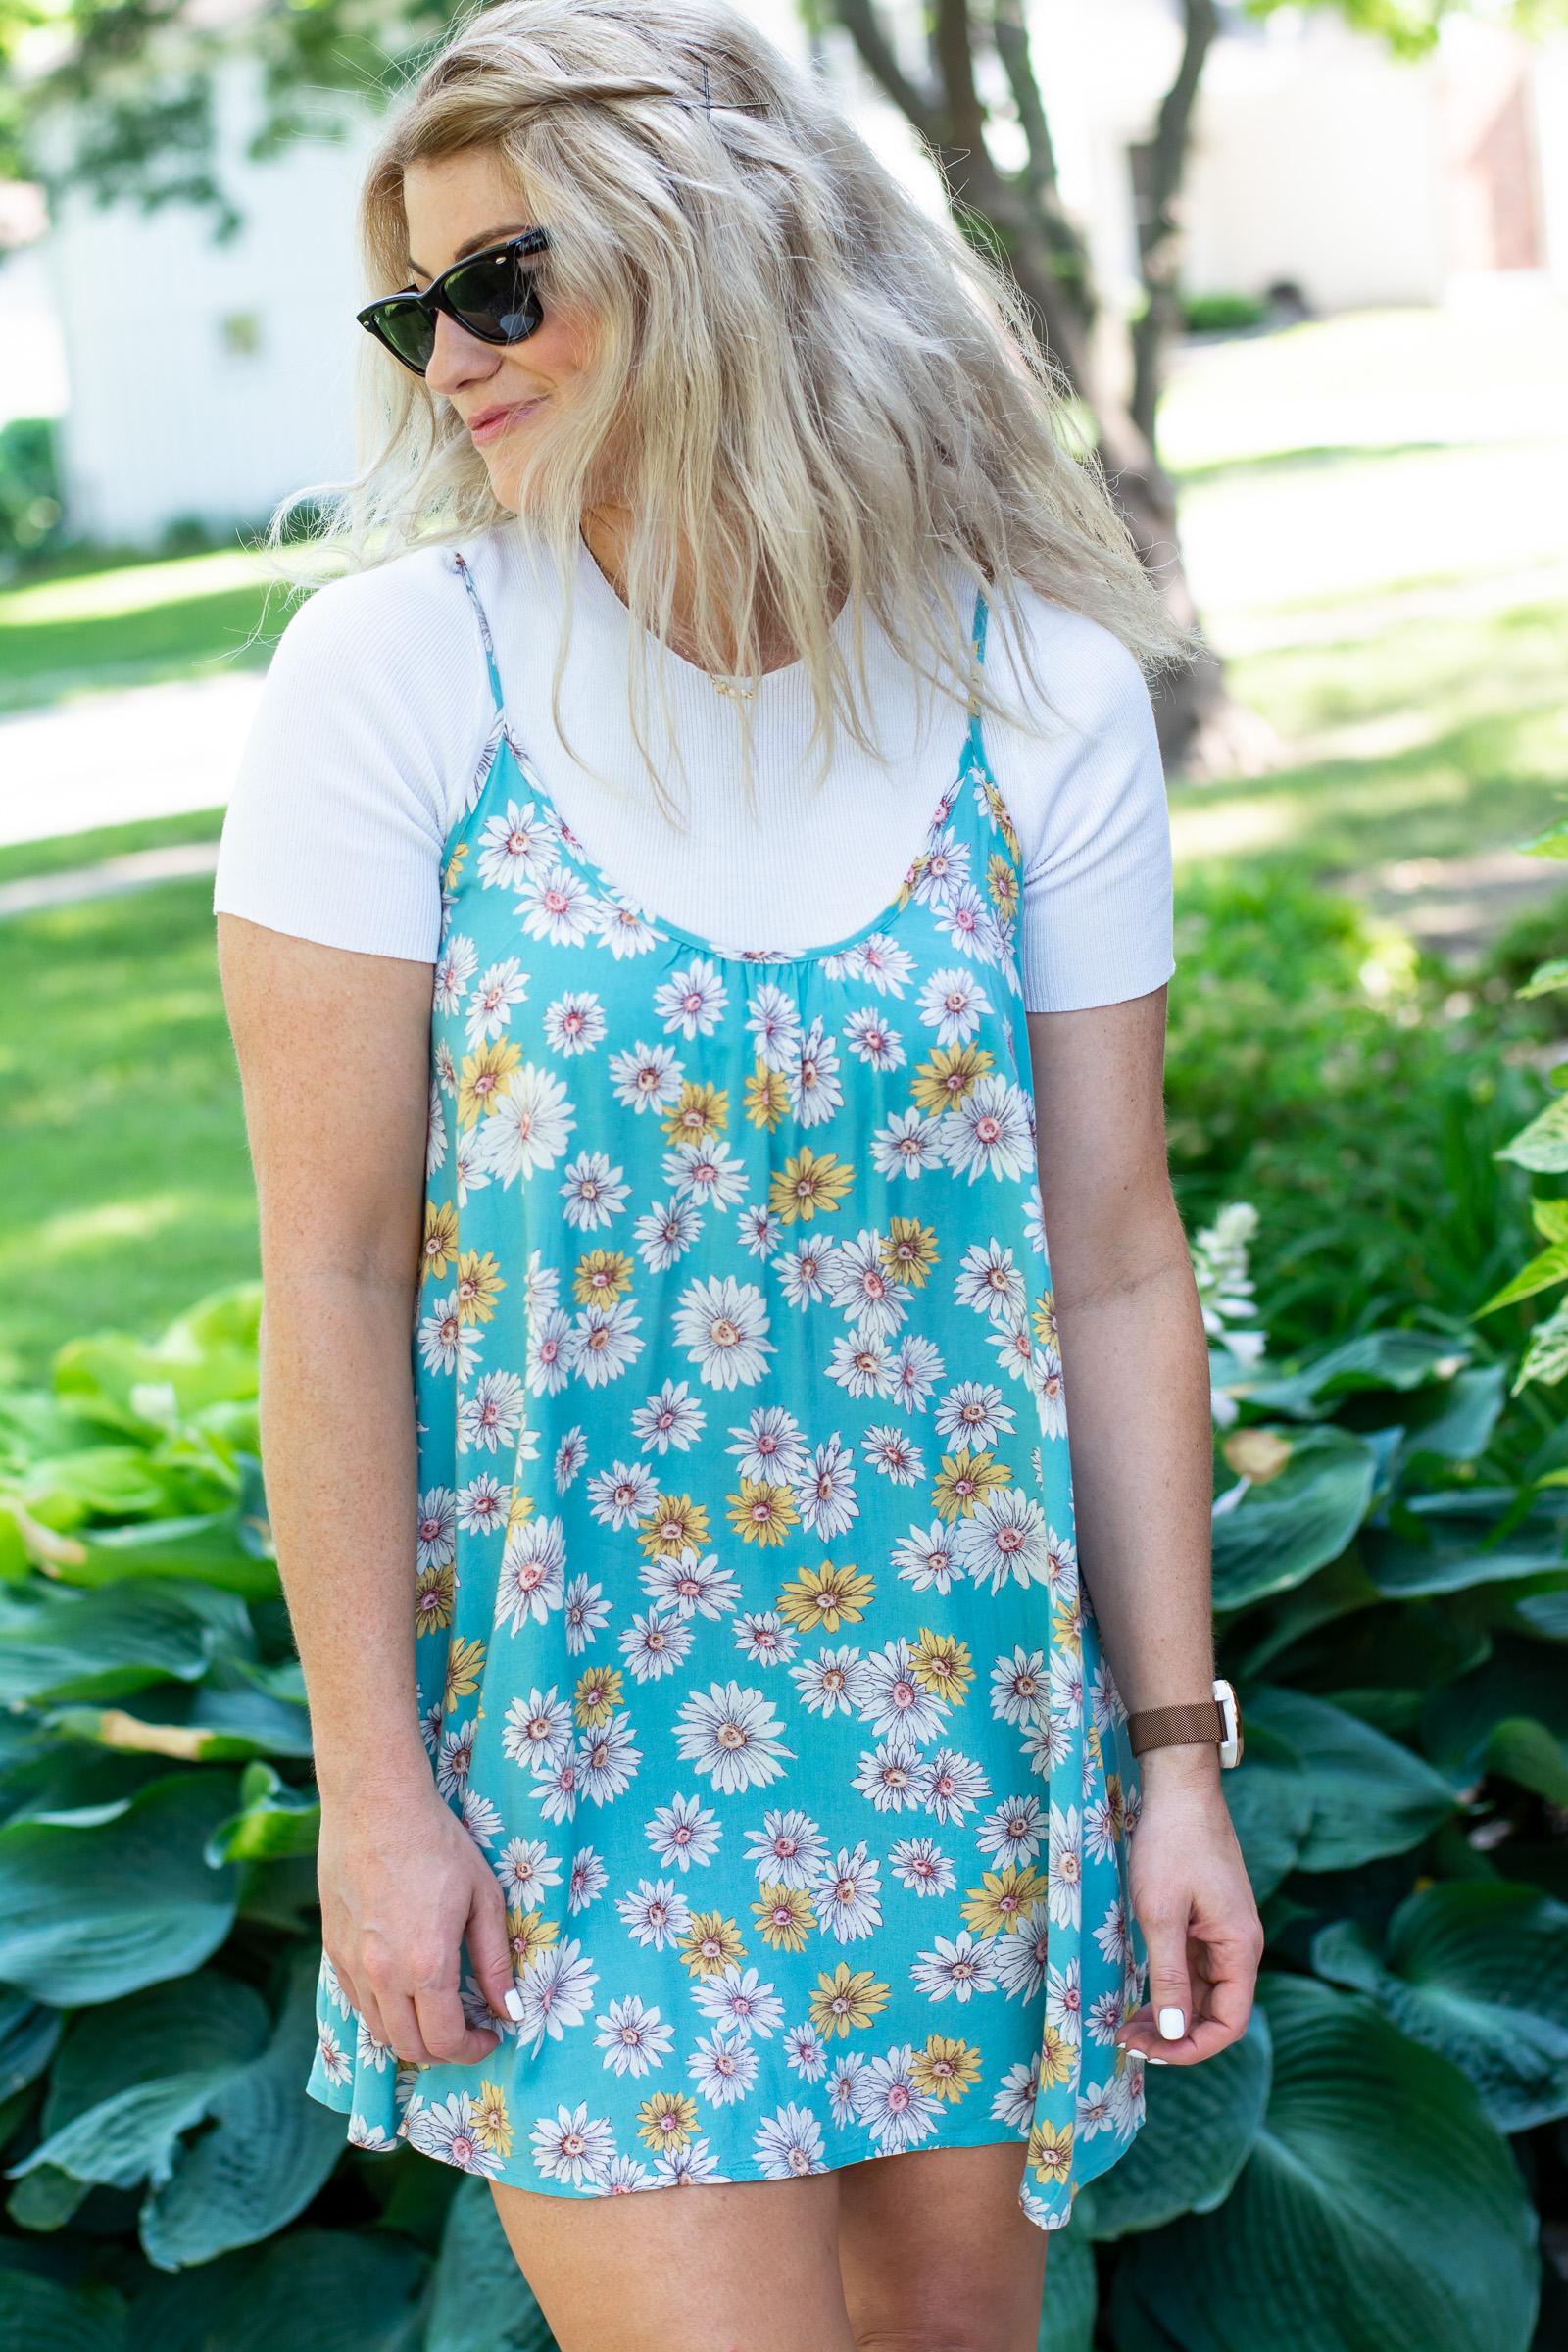 90s Daisy Dress + Crop Top. | Ashley from LSR